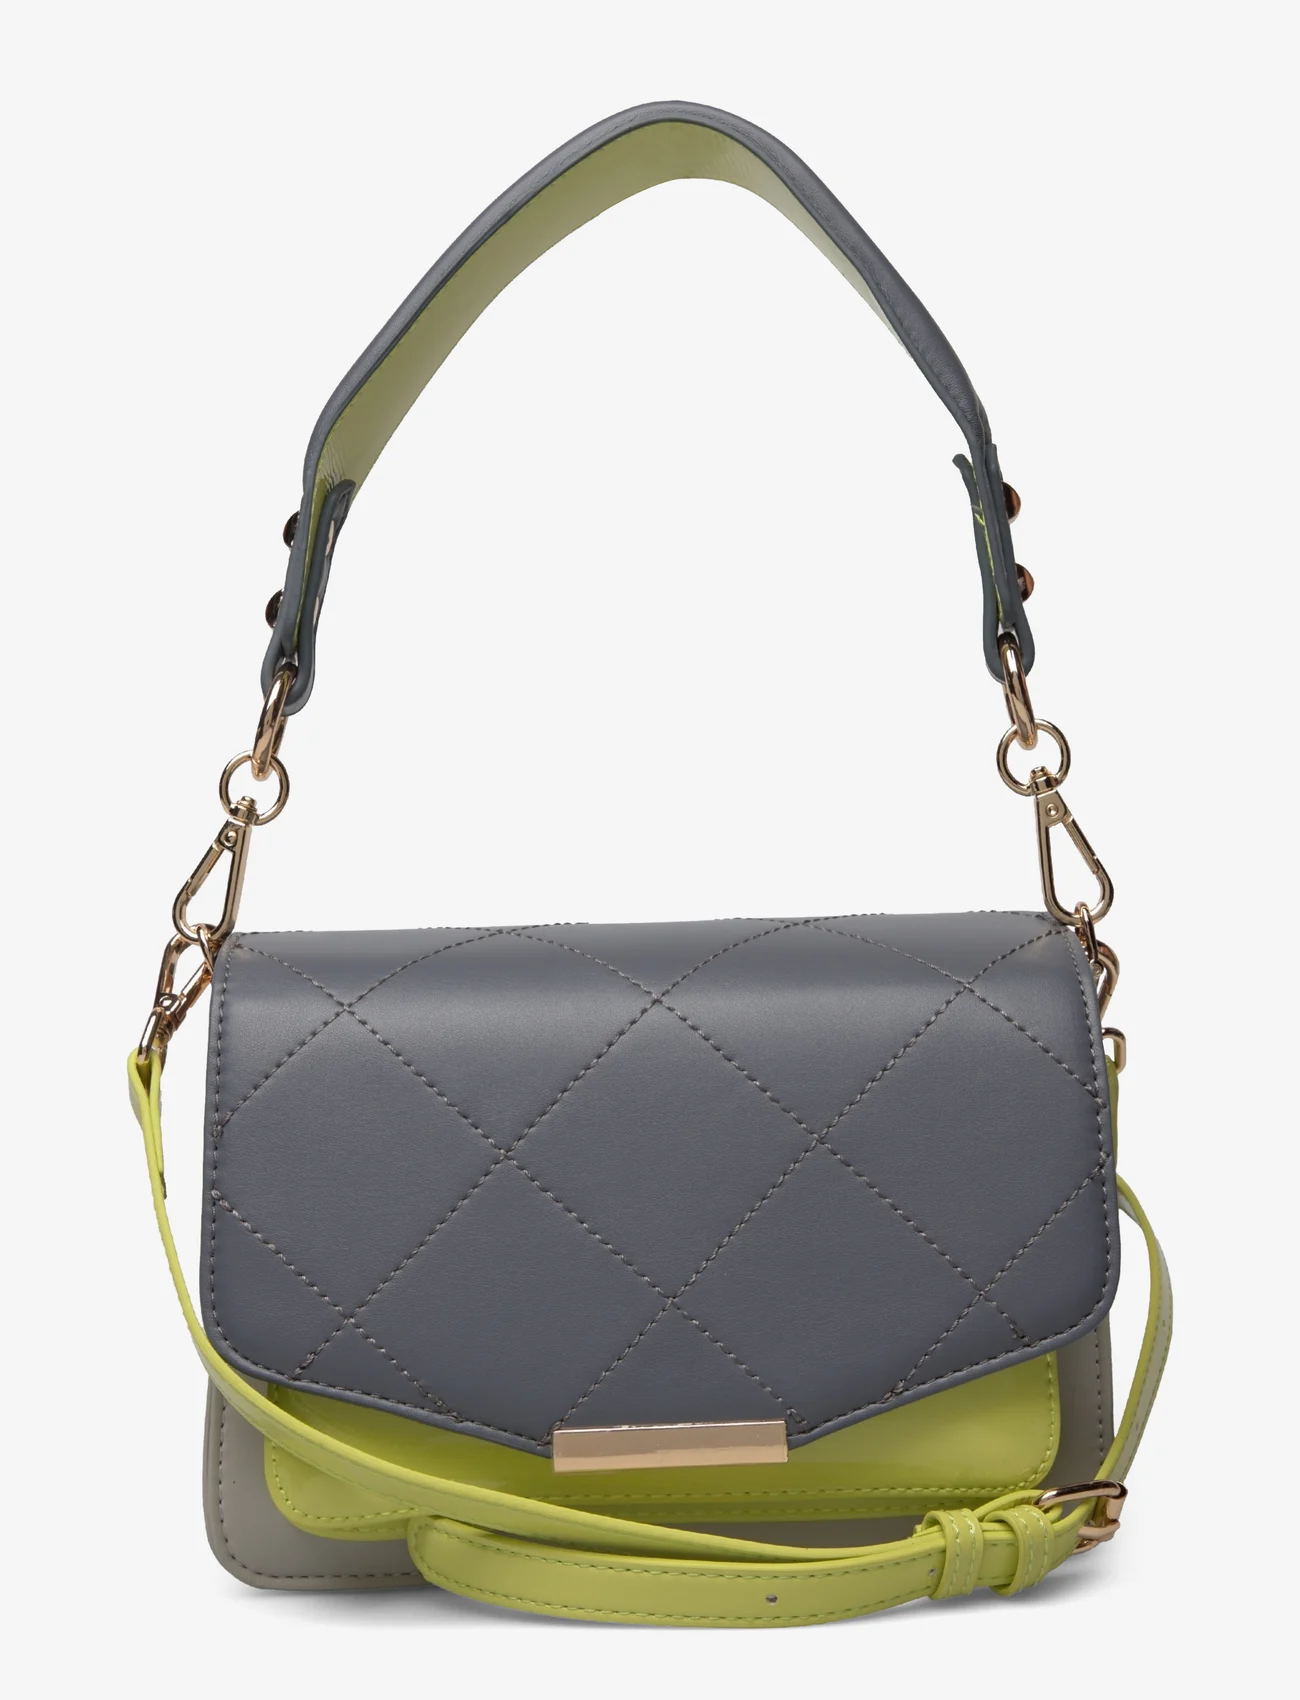 Noella - Blanca Bag Medium - party wear at outlet prices - d.grey/lime green lak/grey - 0